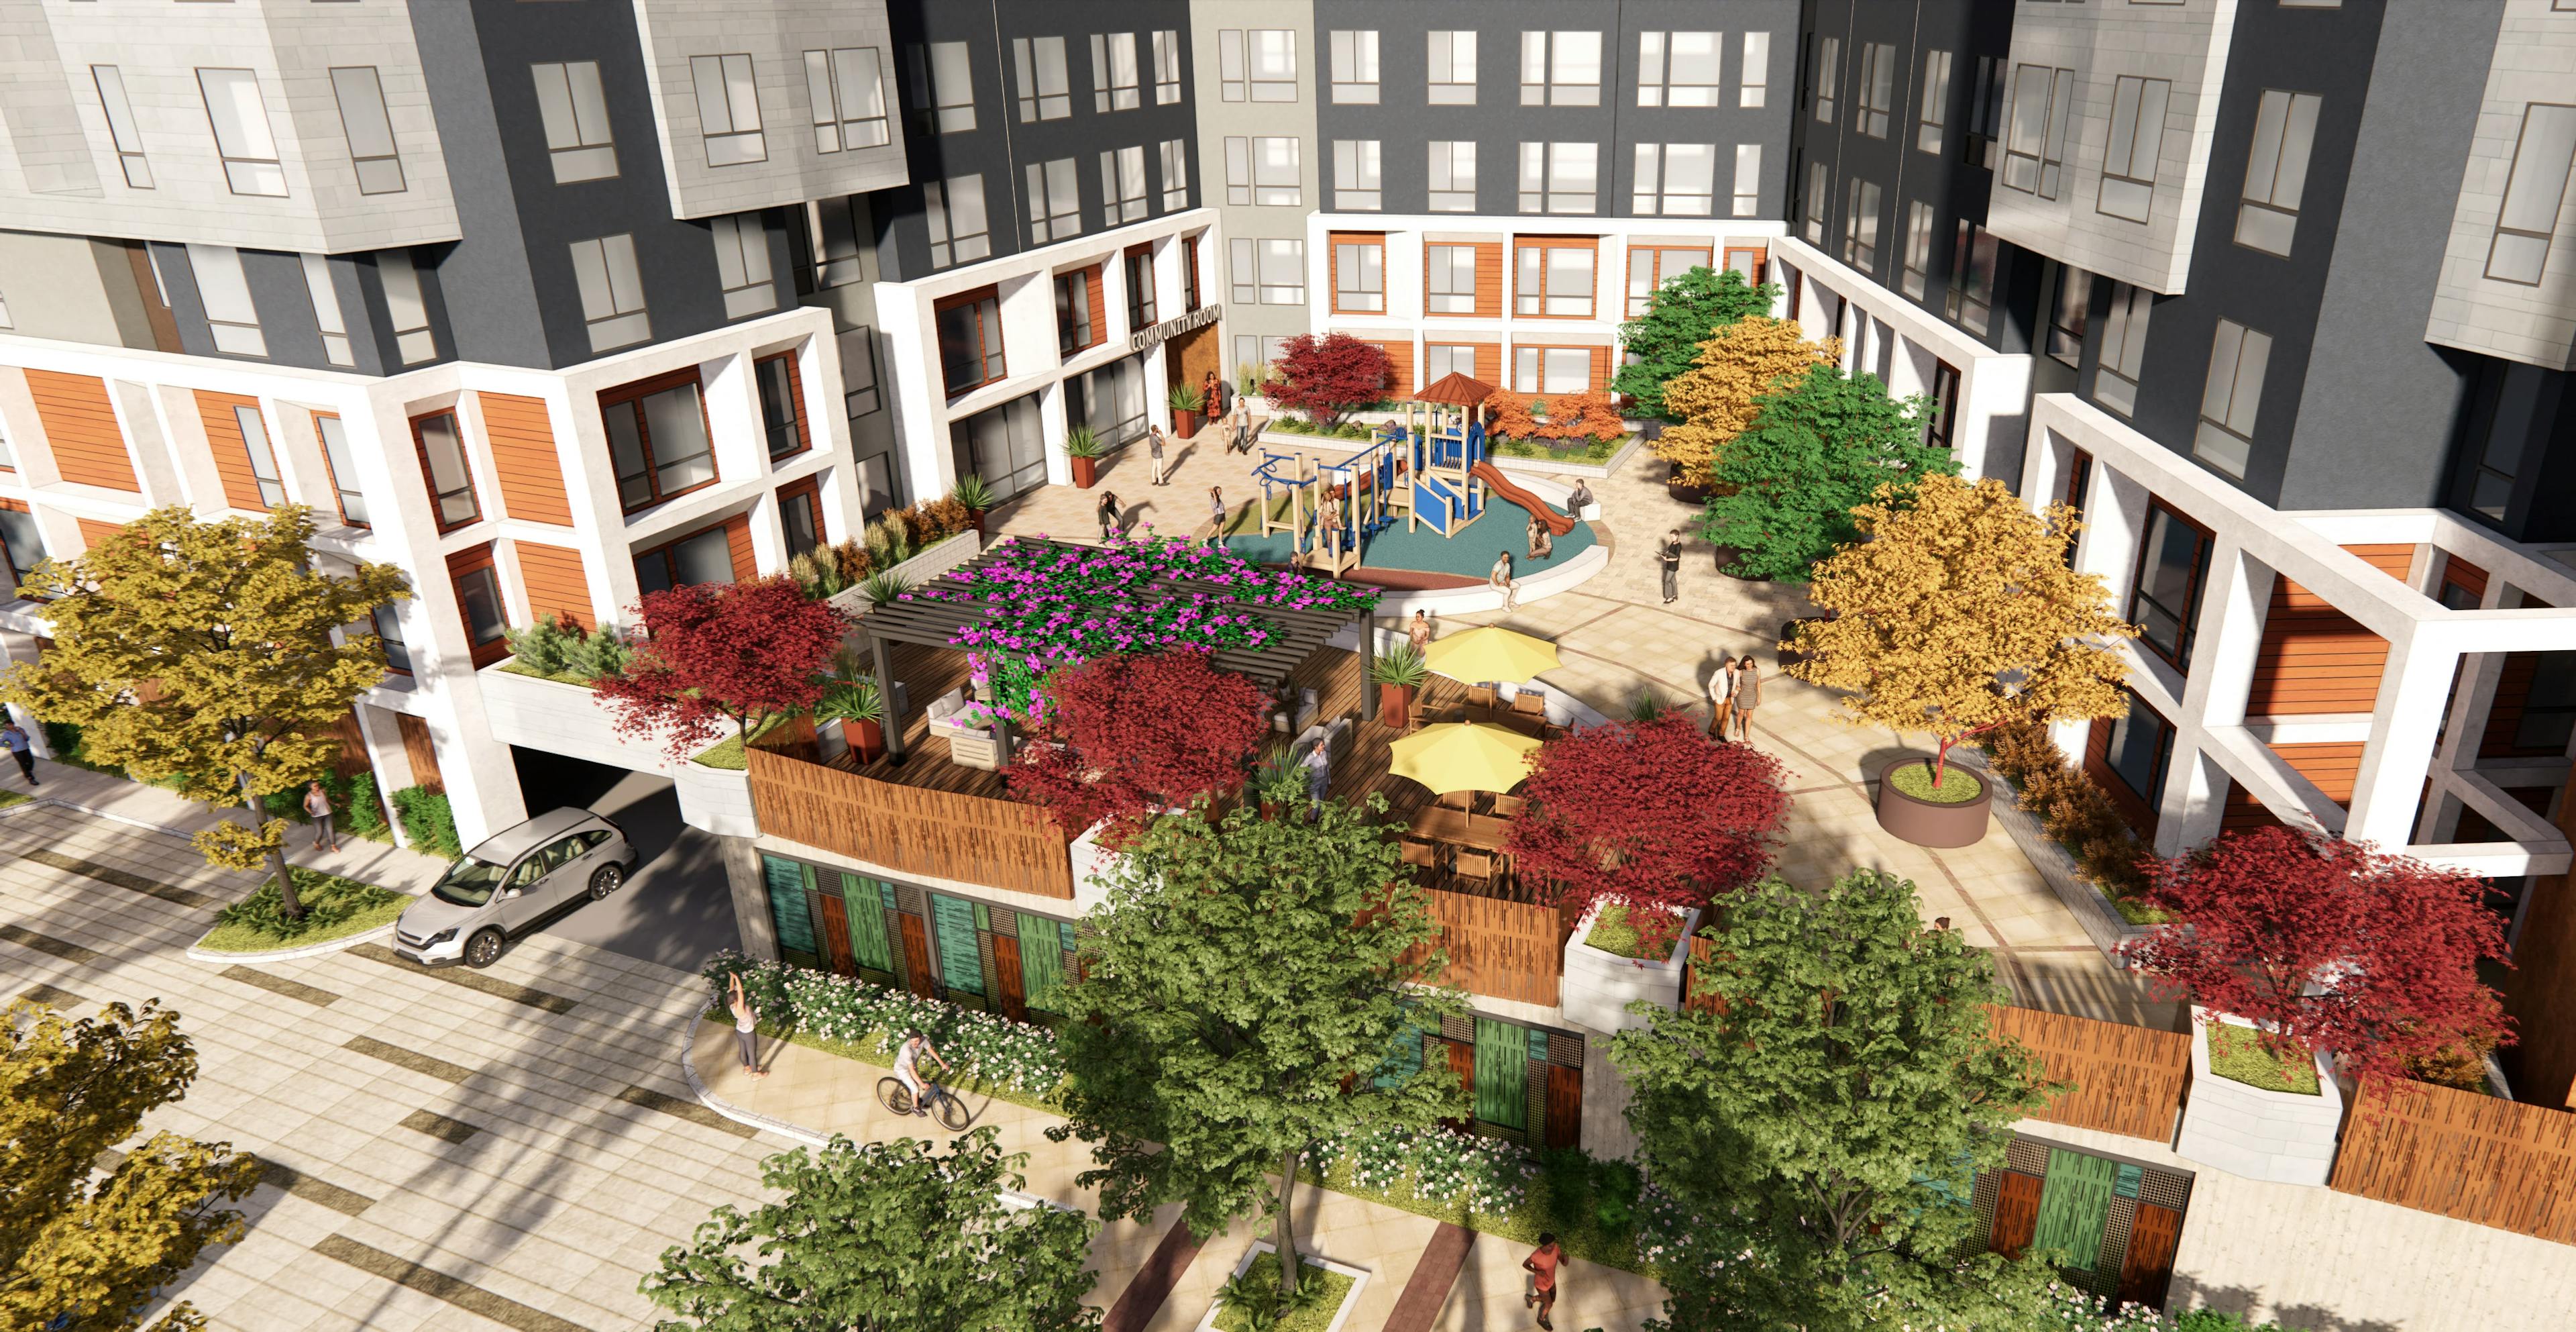 Berryessa Apartments render with recreation zone and playground